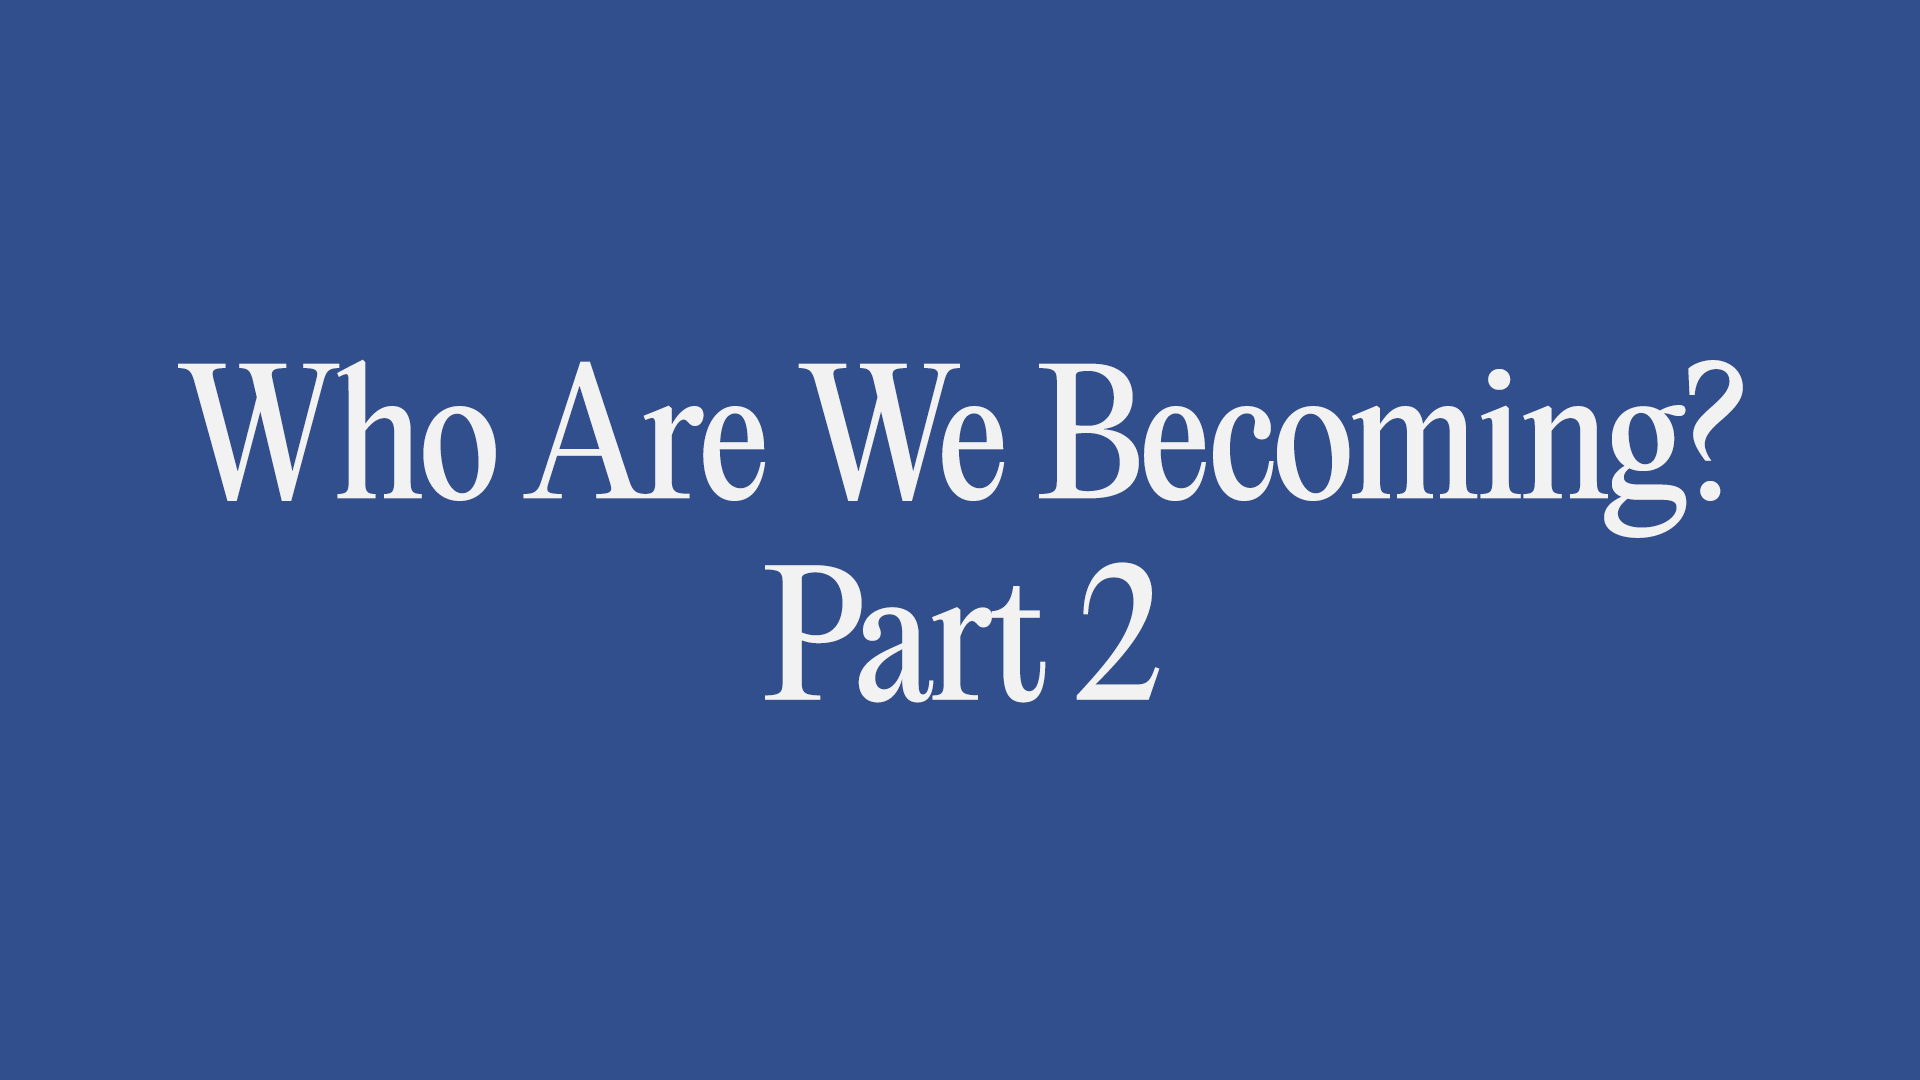 Who Are You Becoming? (Part 2) Image